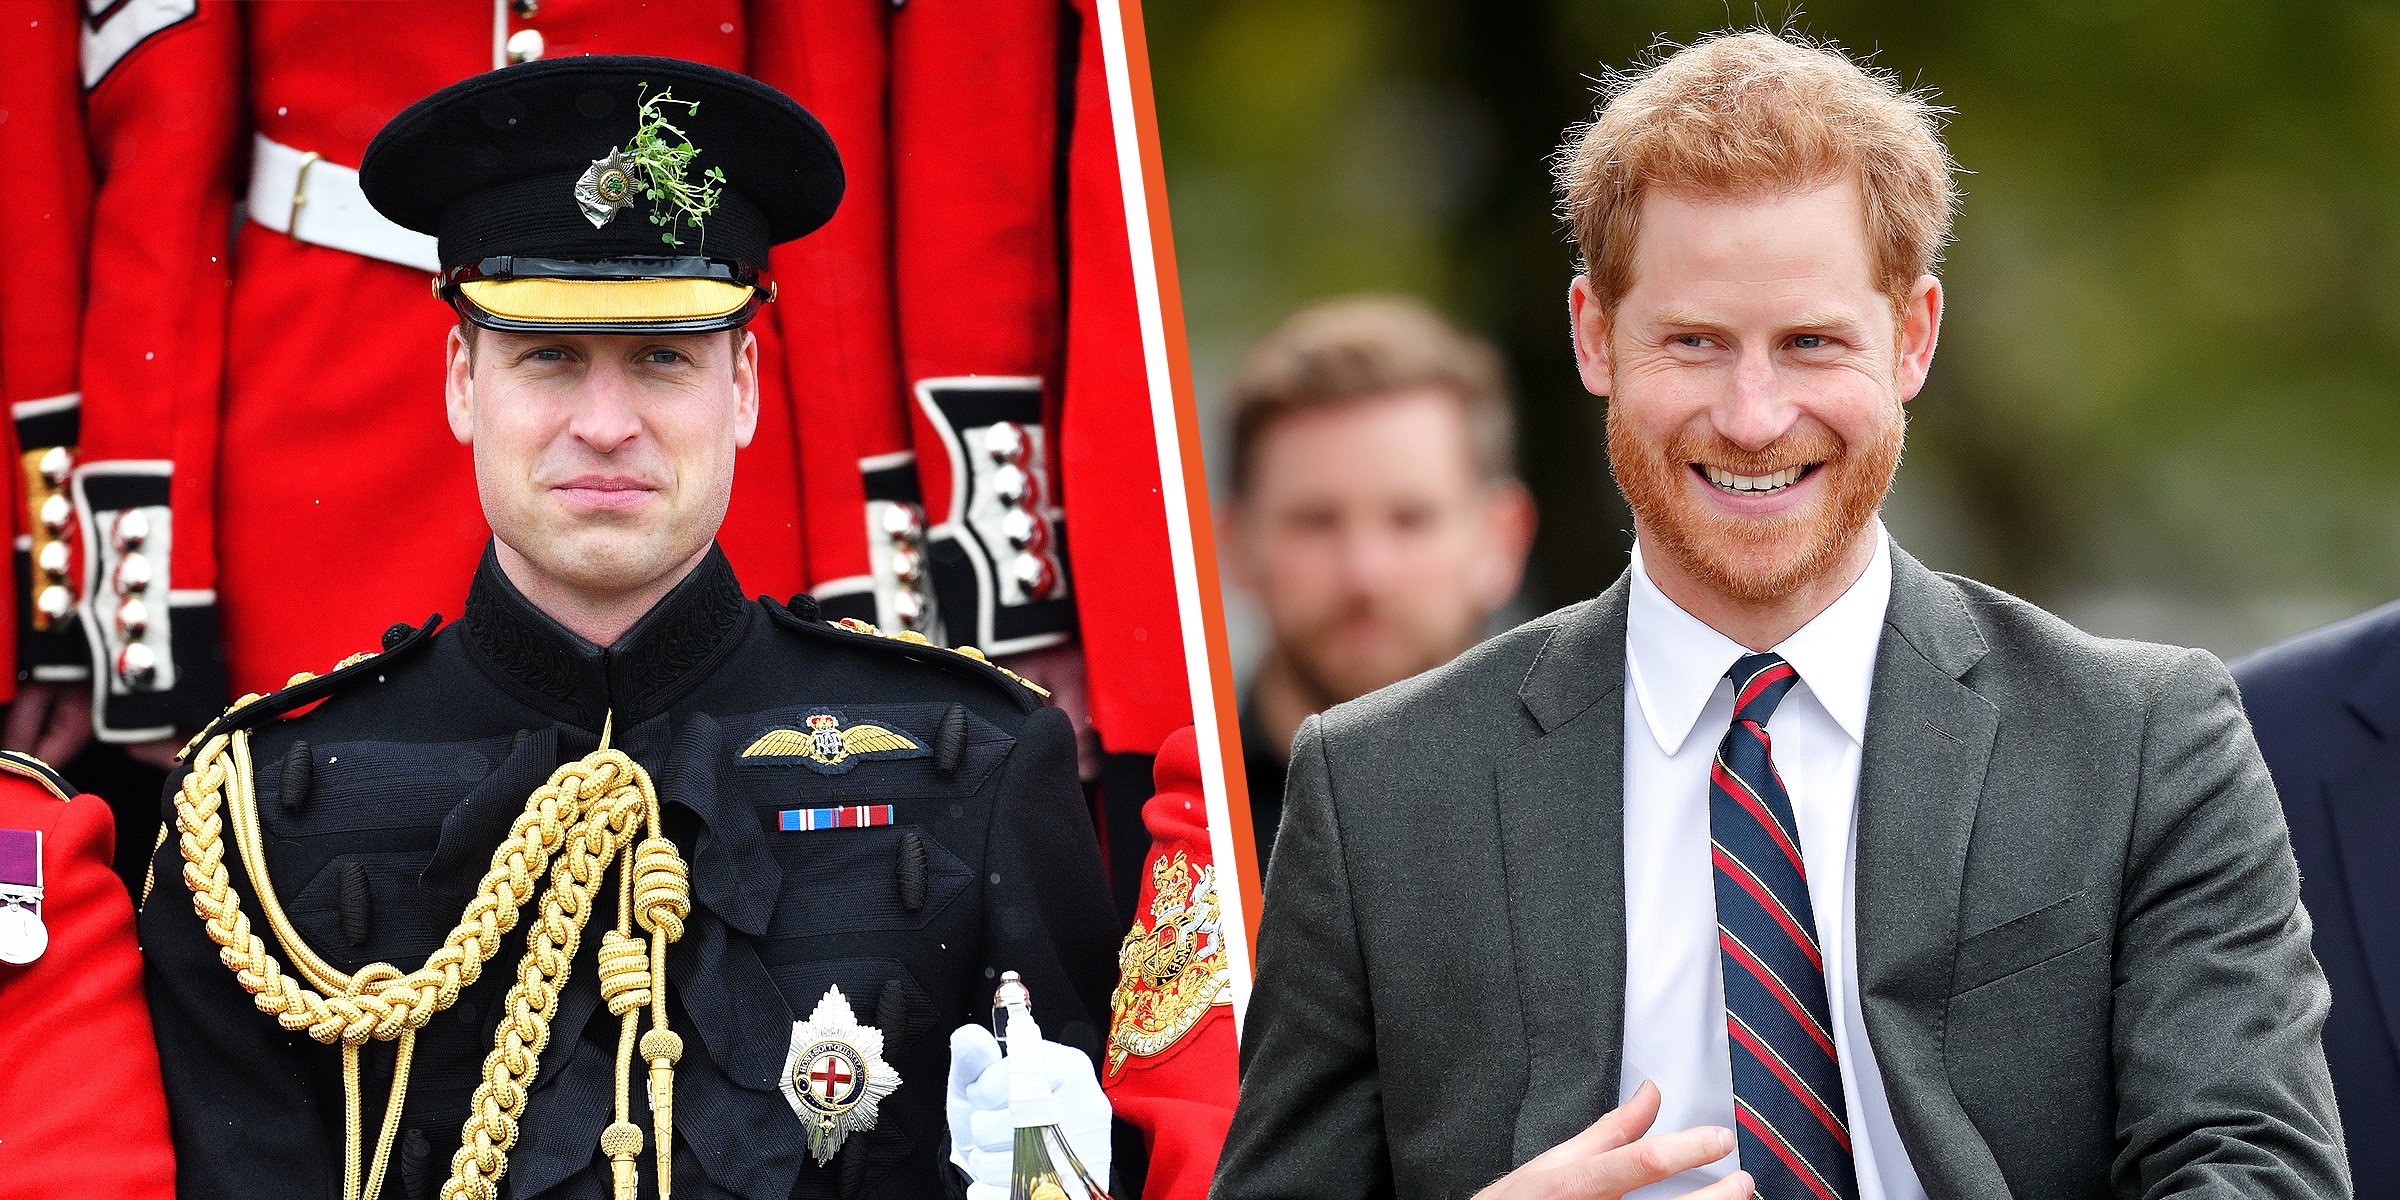 Prince William and Prince Harry | Source: Getty Images